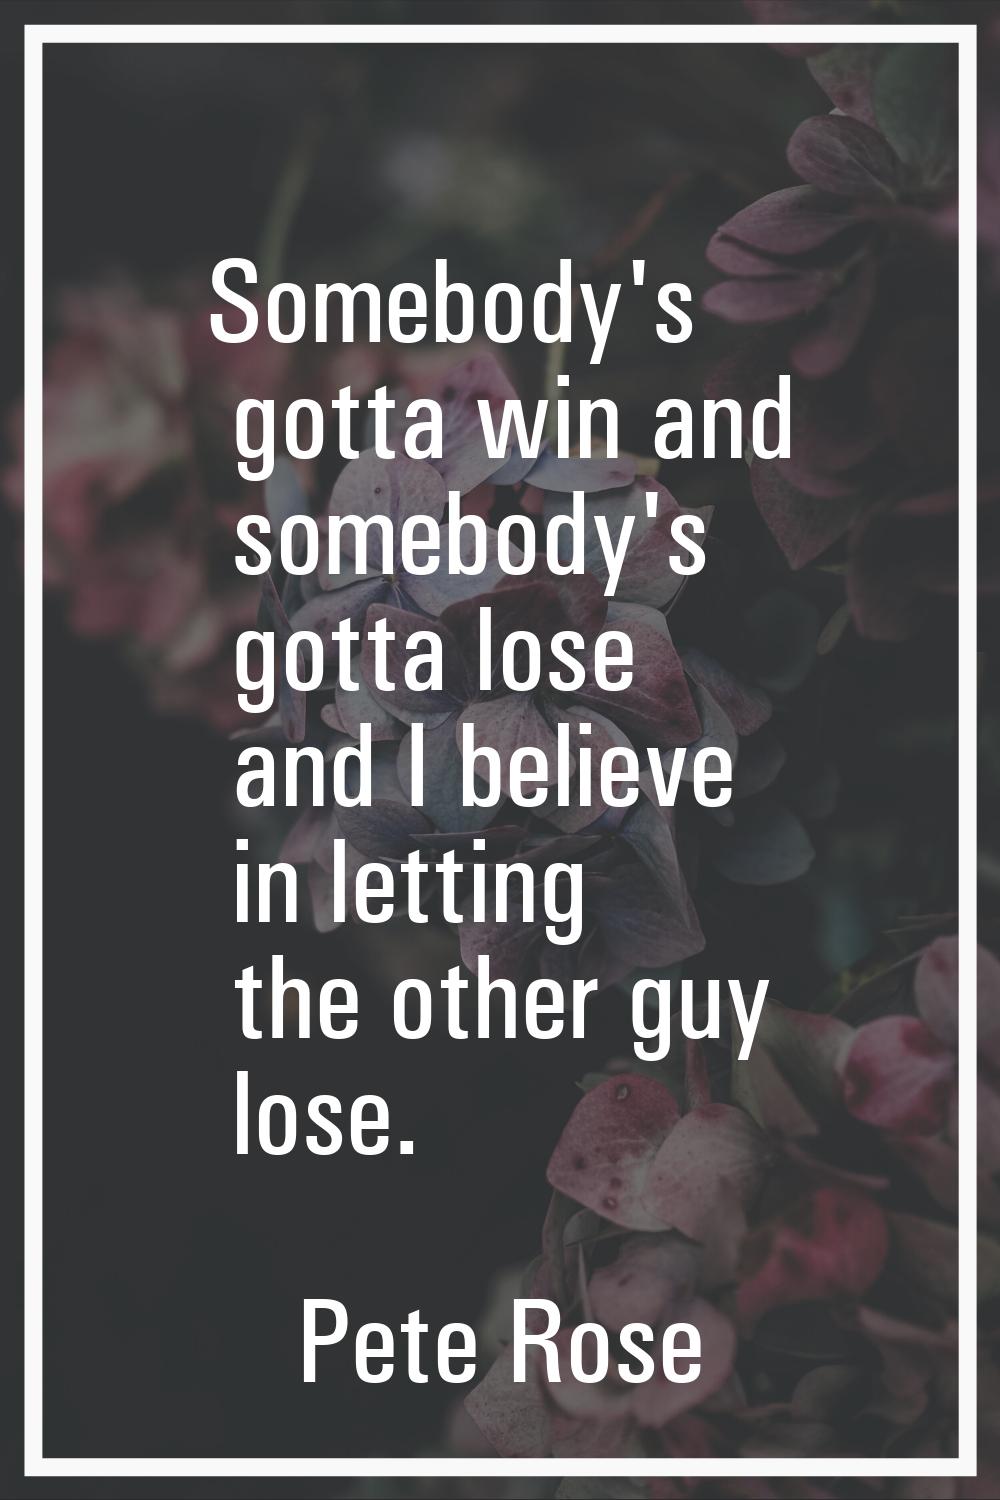 Somebody's gotta win and somebody's gotta lose and I believe in letting the other guy lose.